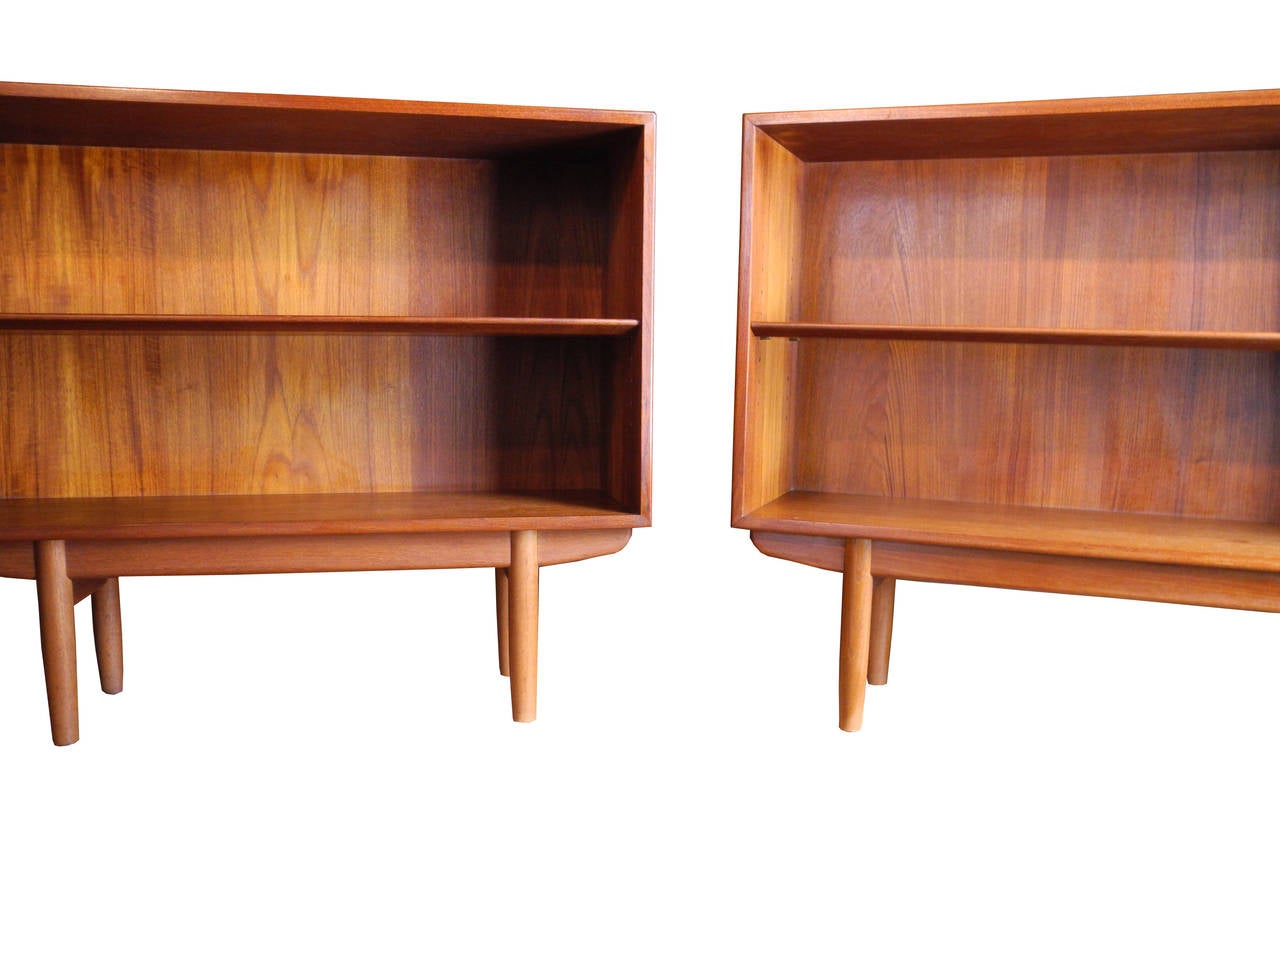 These vintage bookshelves are made of rich teak typical of Danish design.
Use them in the bedroom as nightstands or simple bookcases.